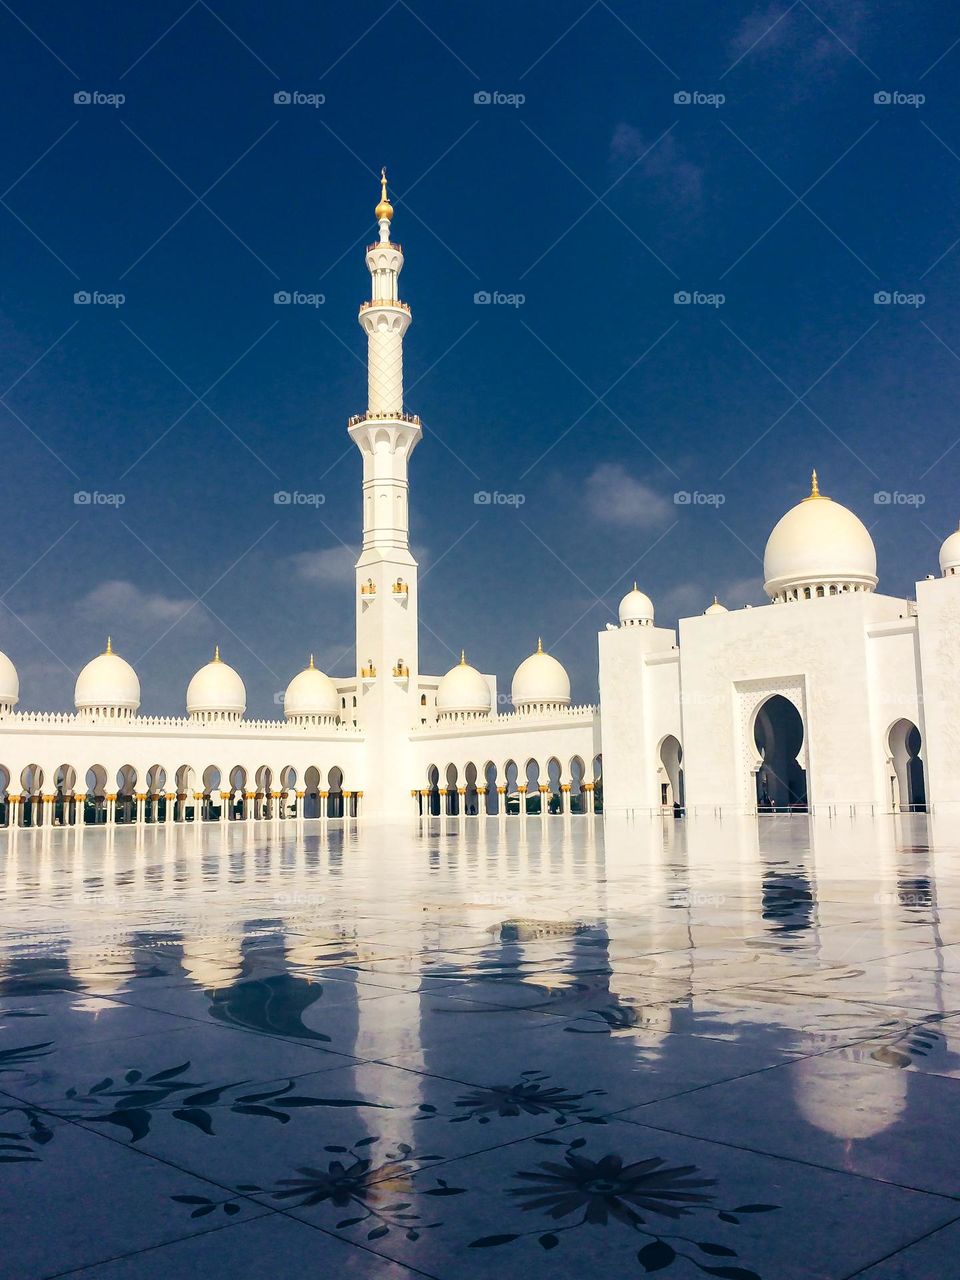 mobile photo architecture, mosque in Abu Dhabi white domes